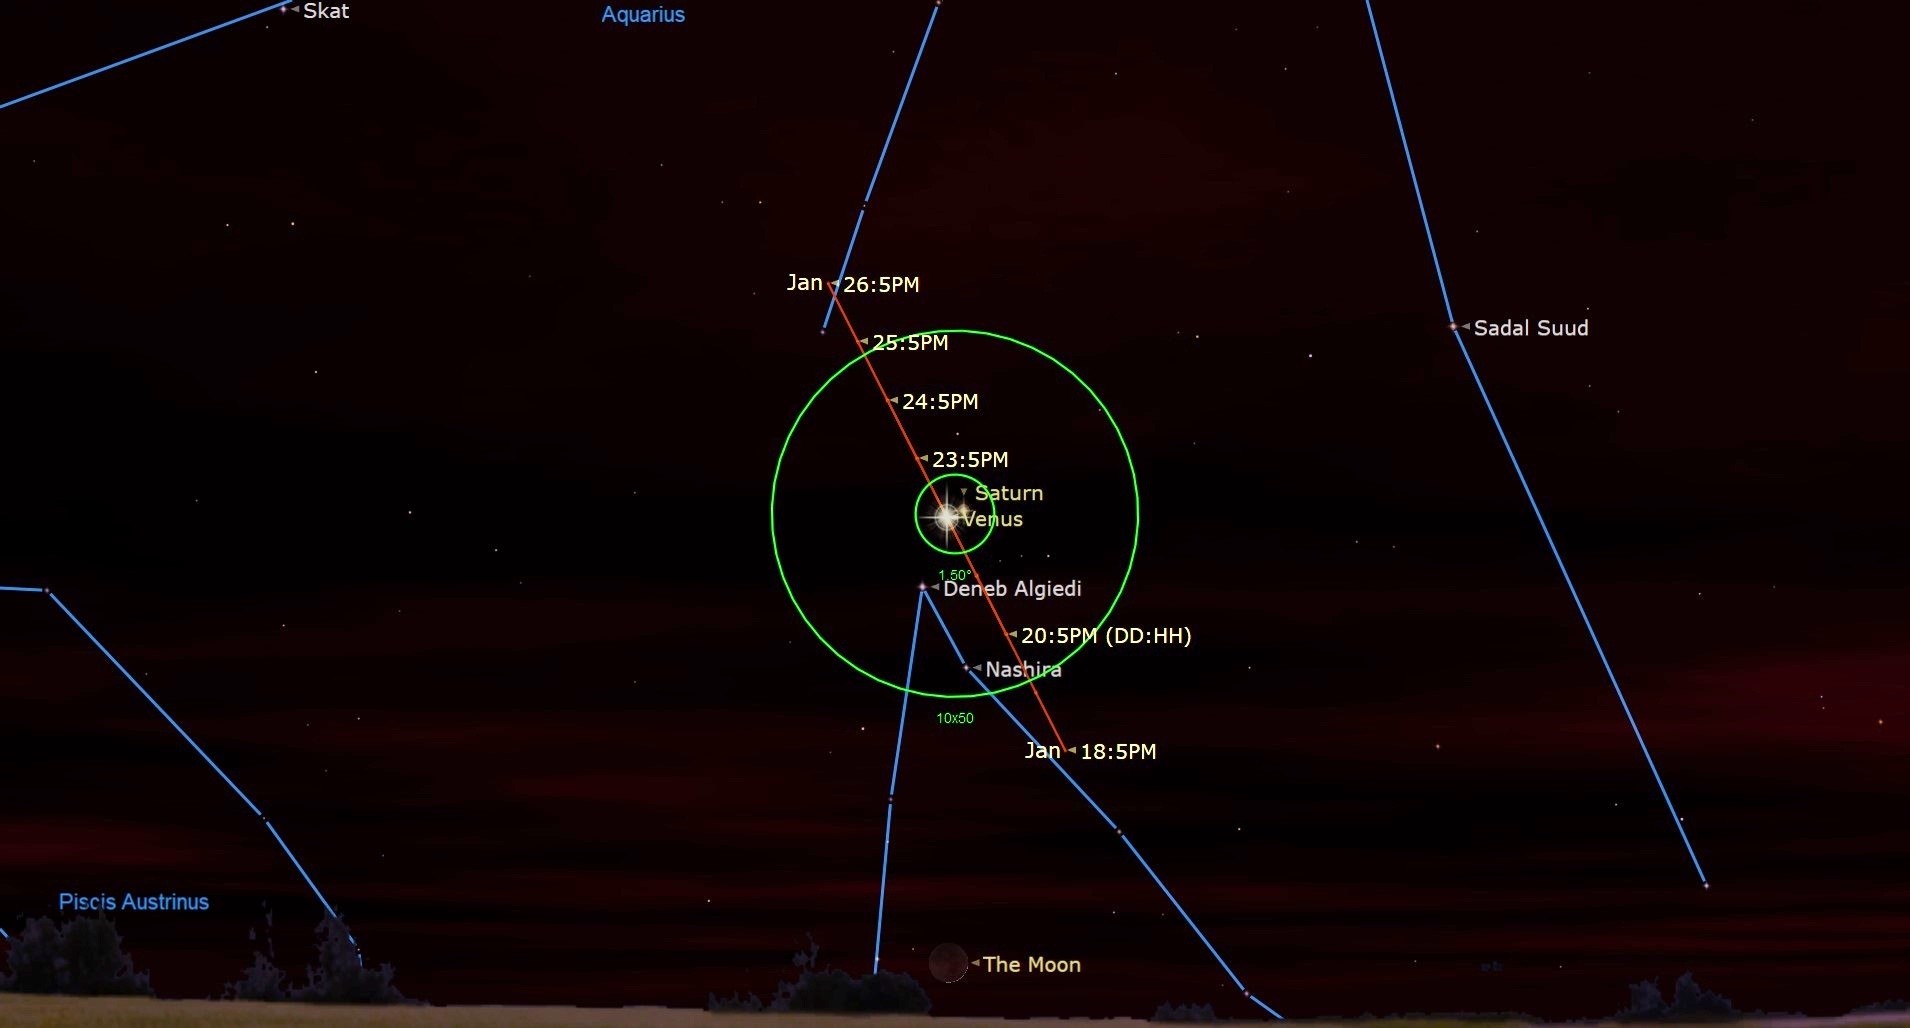 An illustration of the night sky on January 22 showing the conjunction of Venus and Saturn.